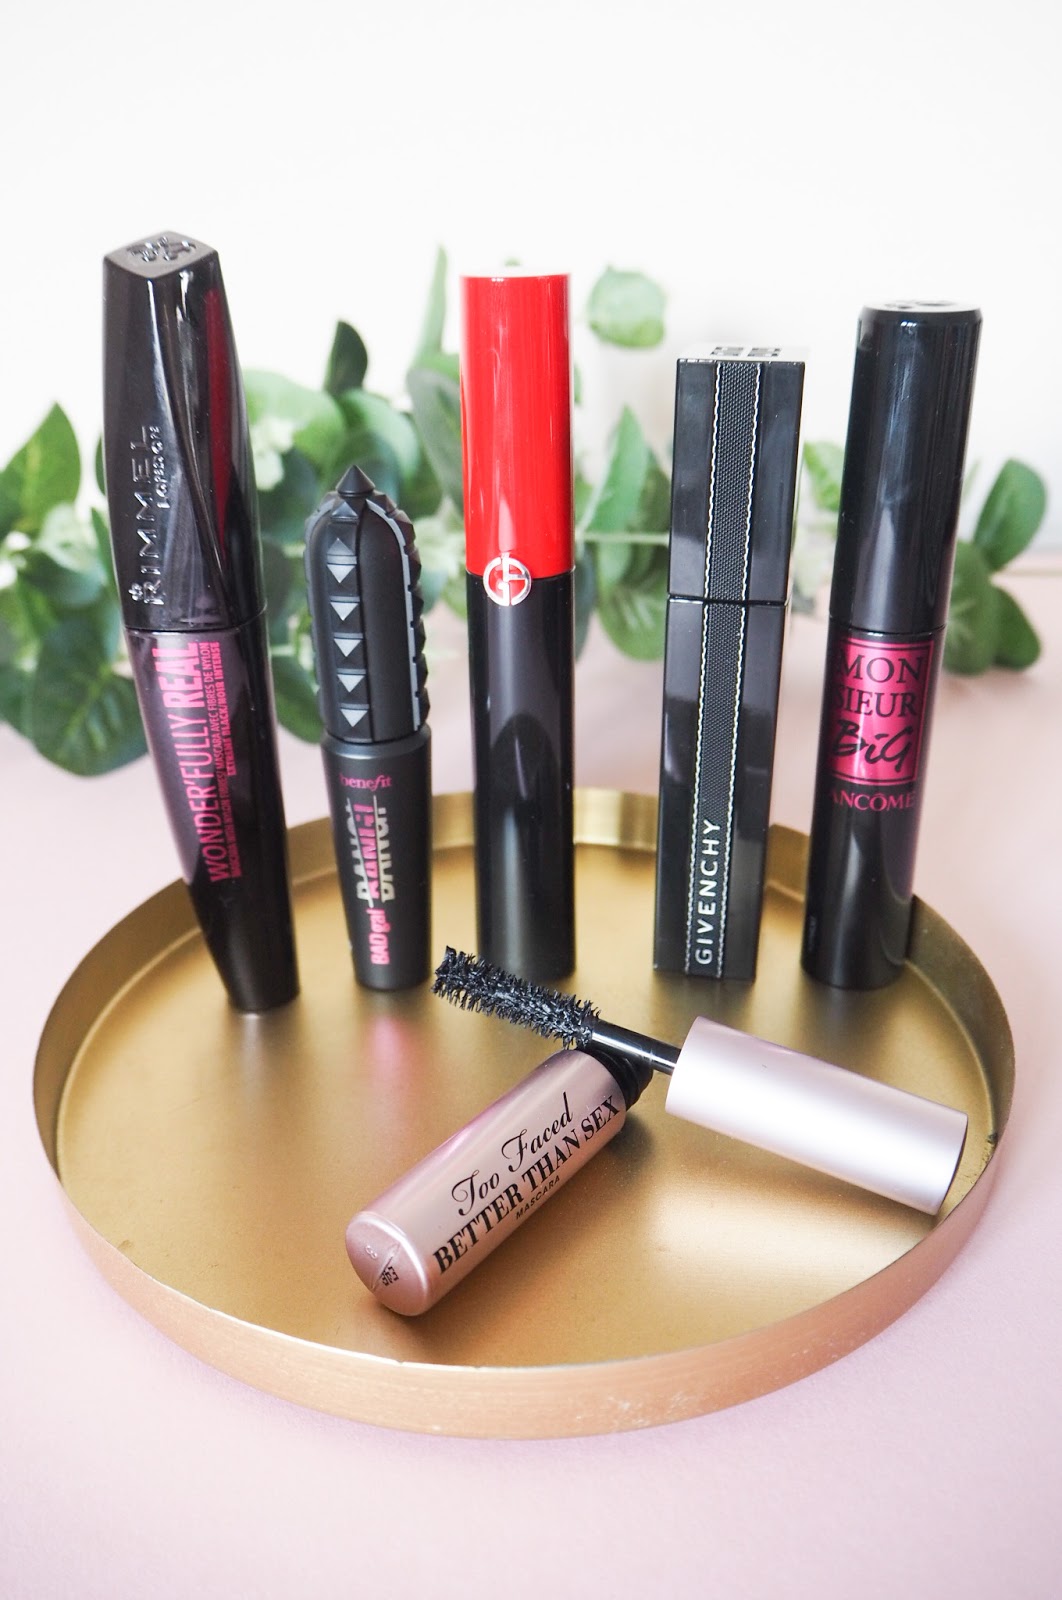 Mascaras from different brands lined up to be reviewed.